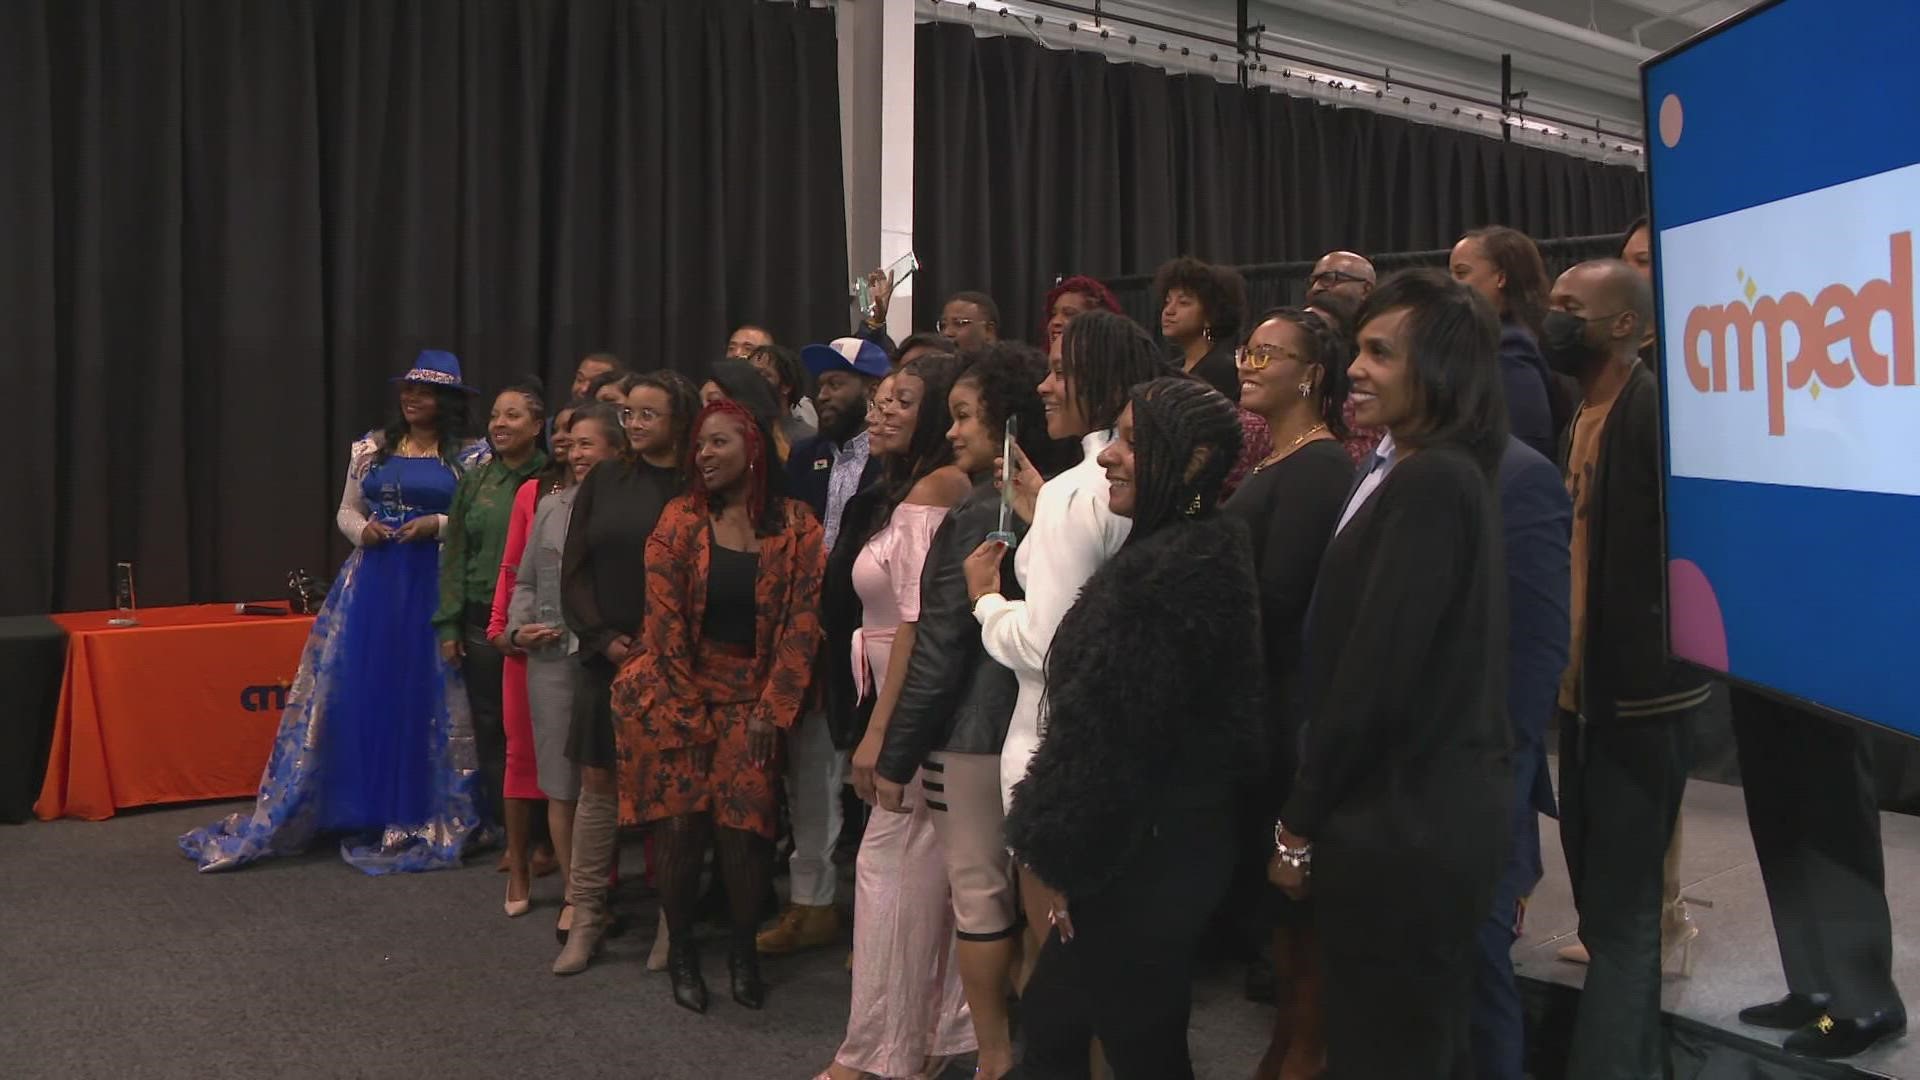 Black and Brown entrepreneurs in Louisville were celebrated for completing the year-long business incubator program.